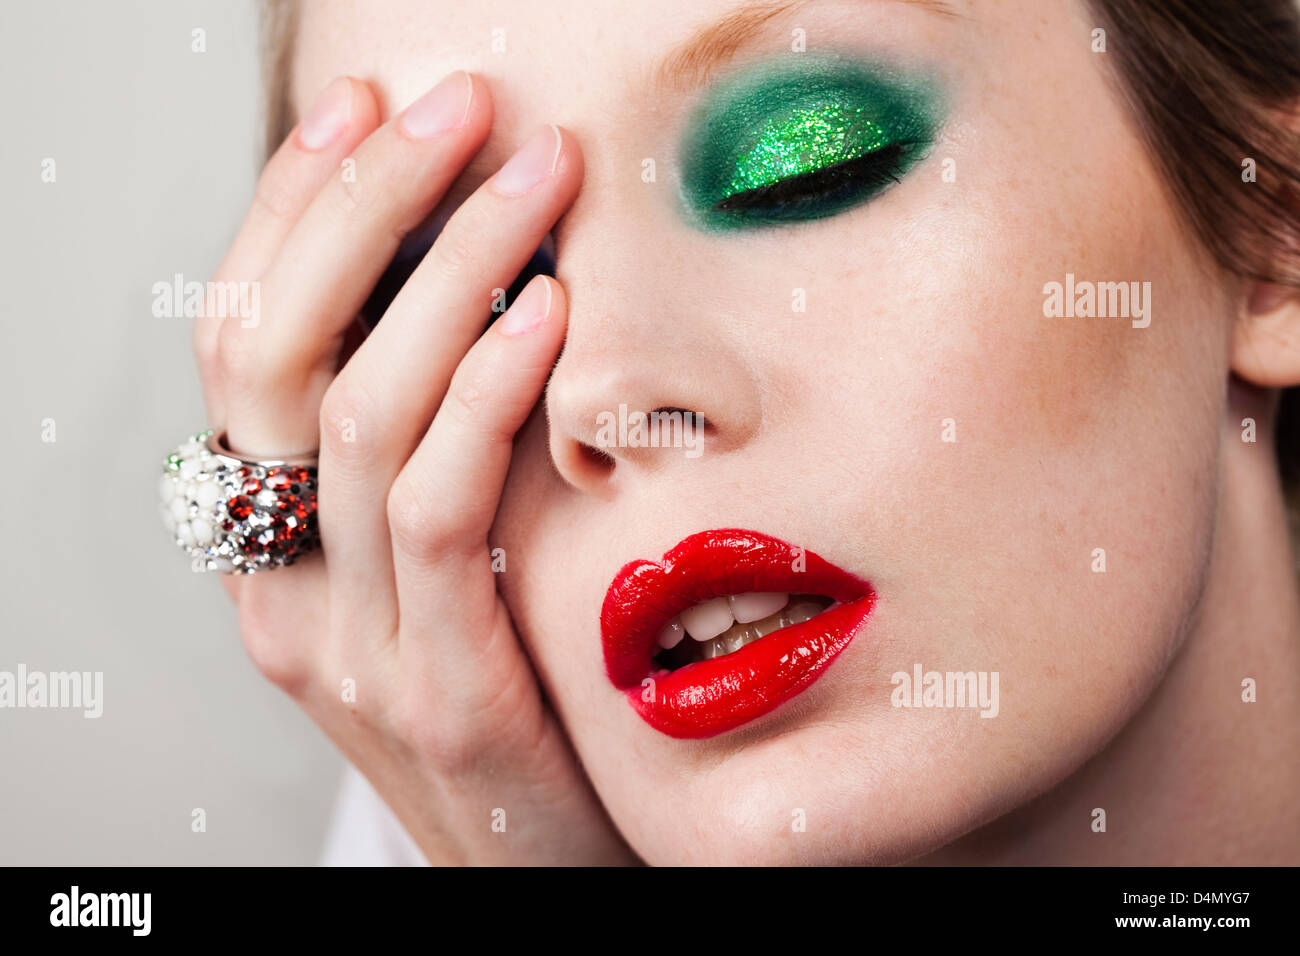 Female model wearing green eye shadows and red lips Stock Photo